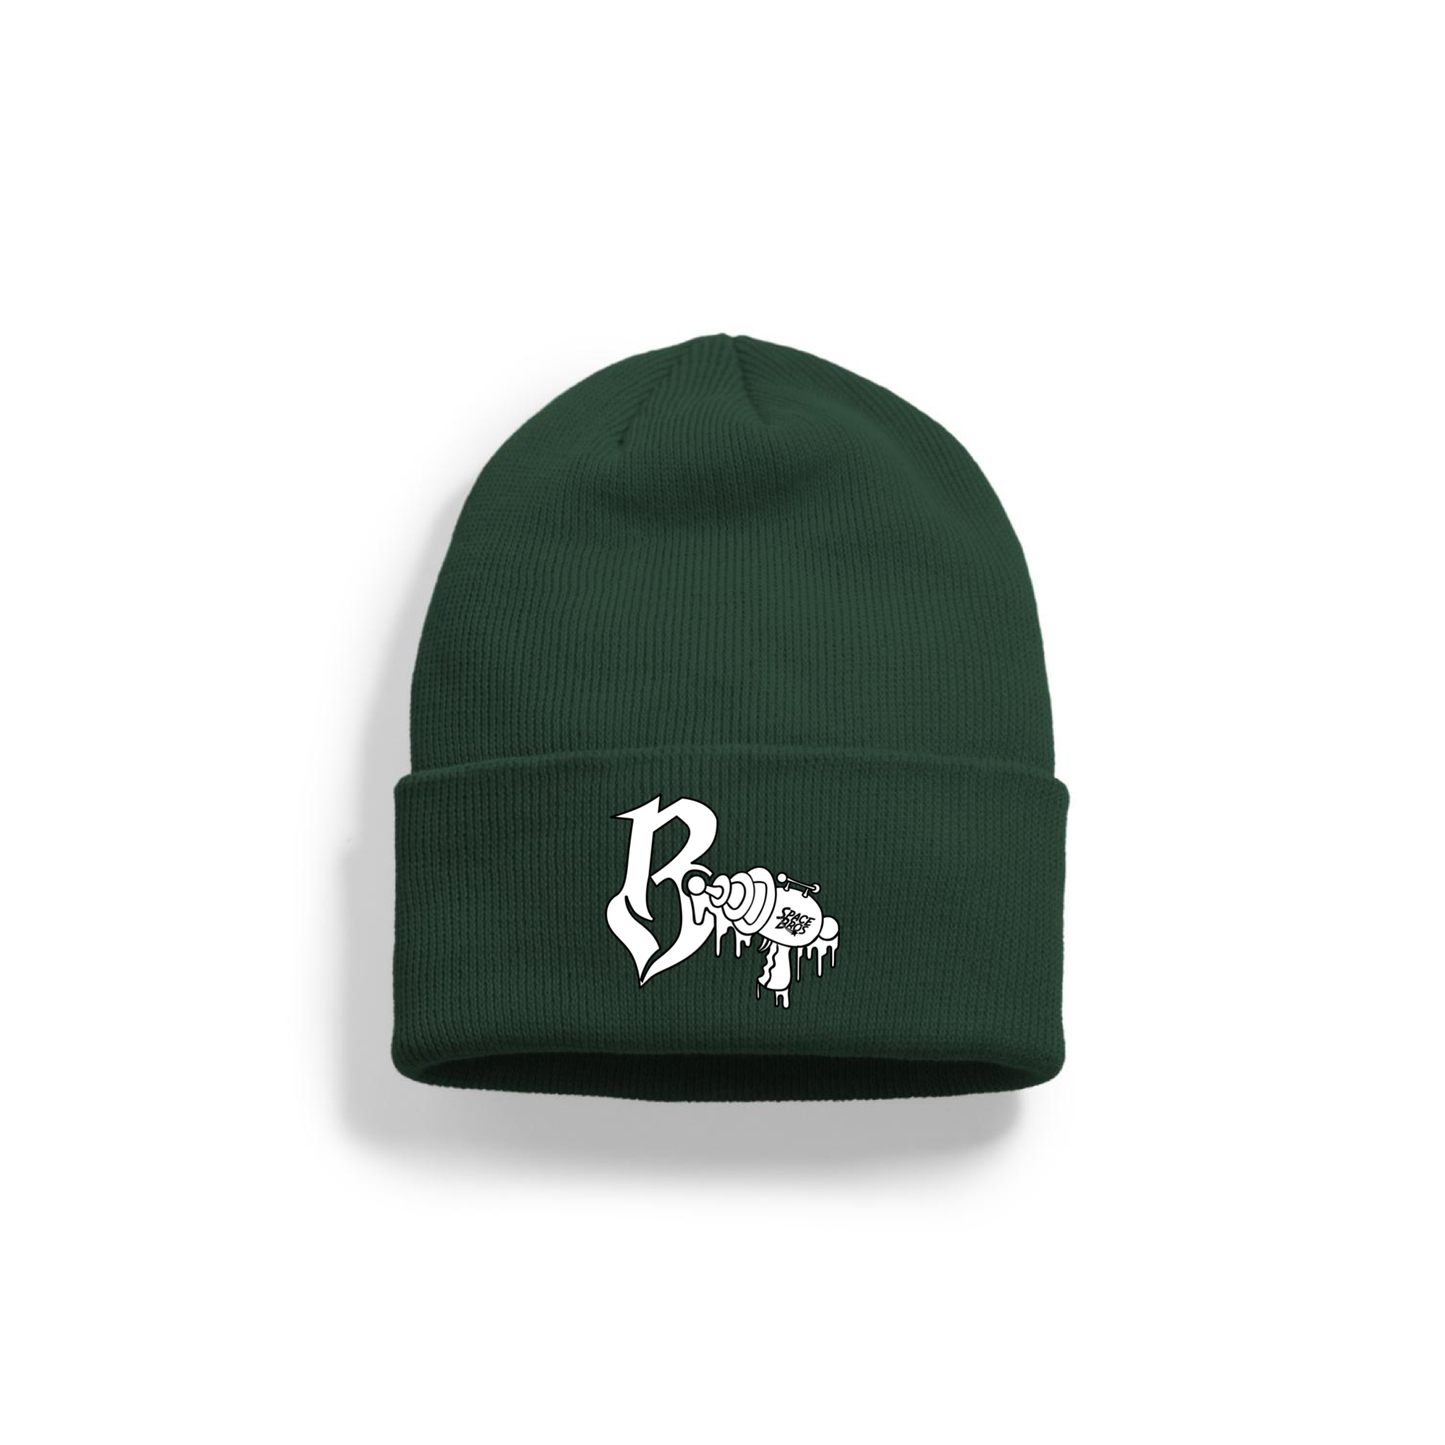 BAKA NOTNICE X SPACE BROS EMBROIDERED FINE KNIT BEANIE (HUNTER GREEN)